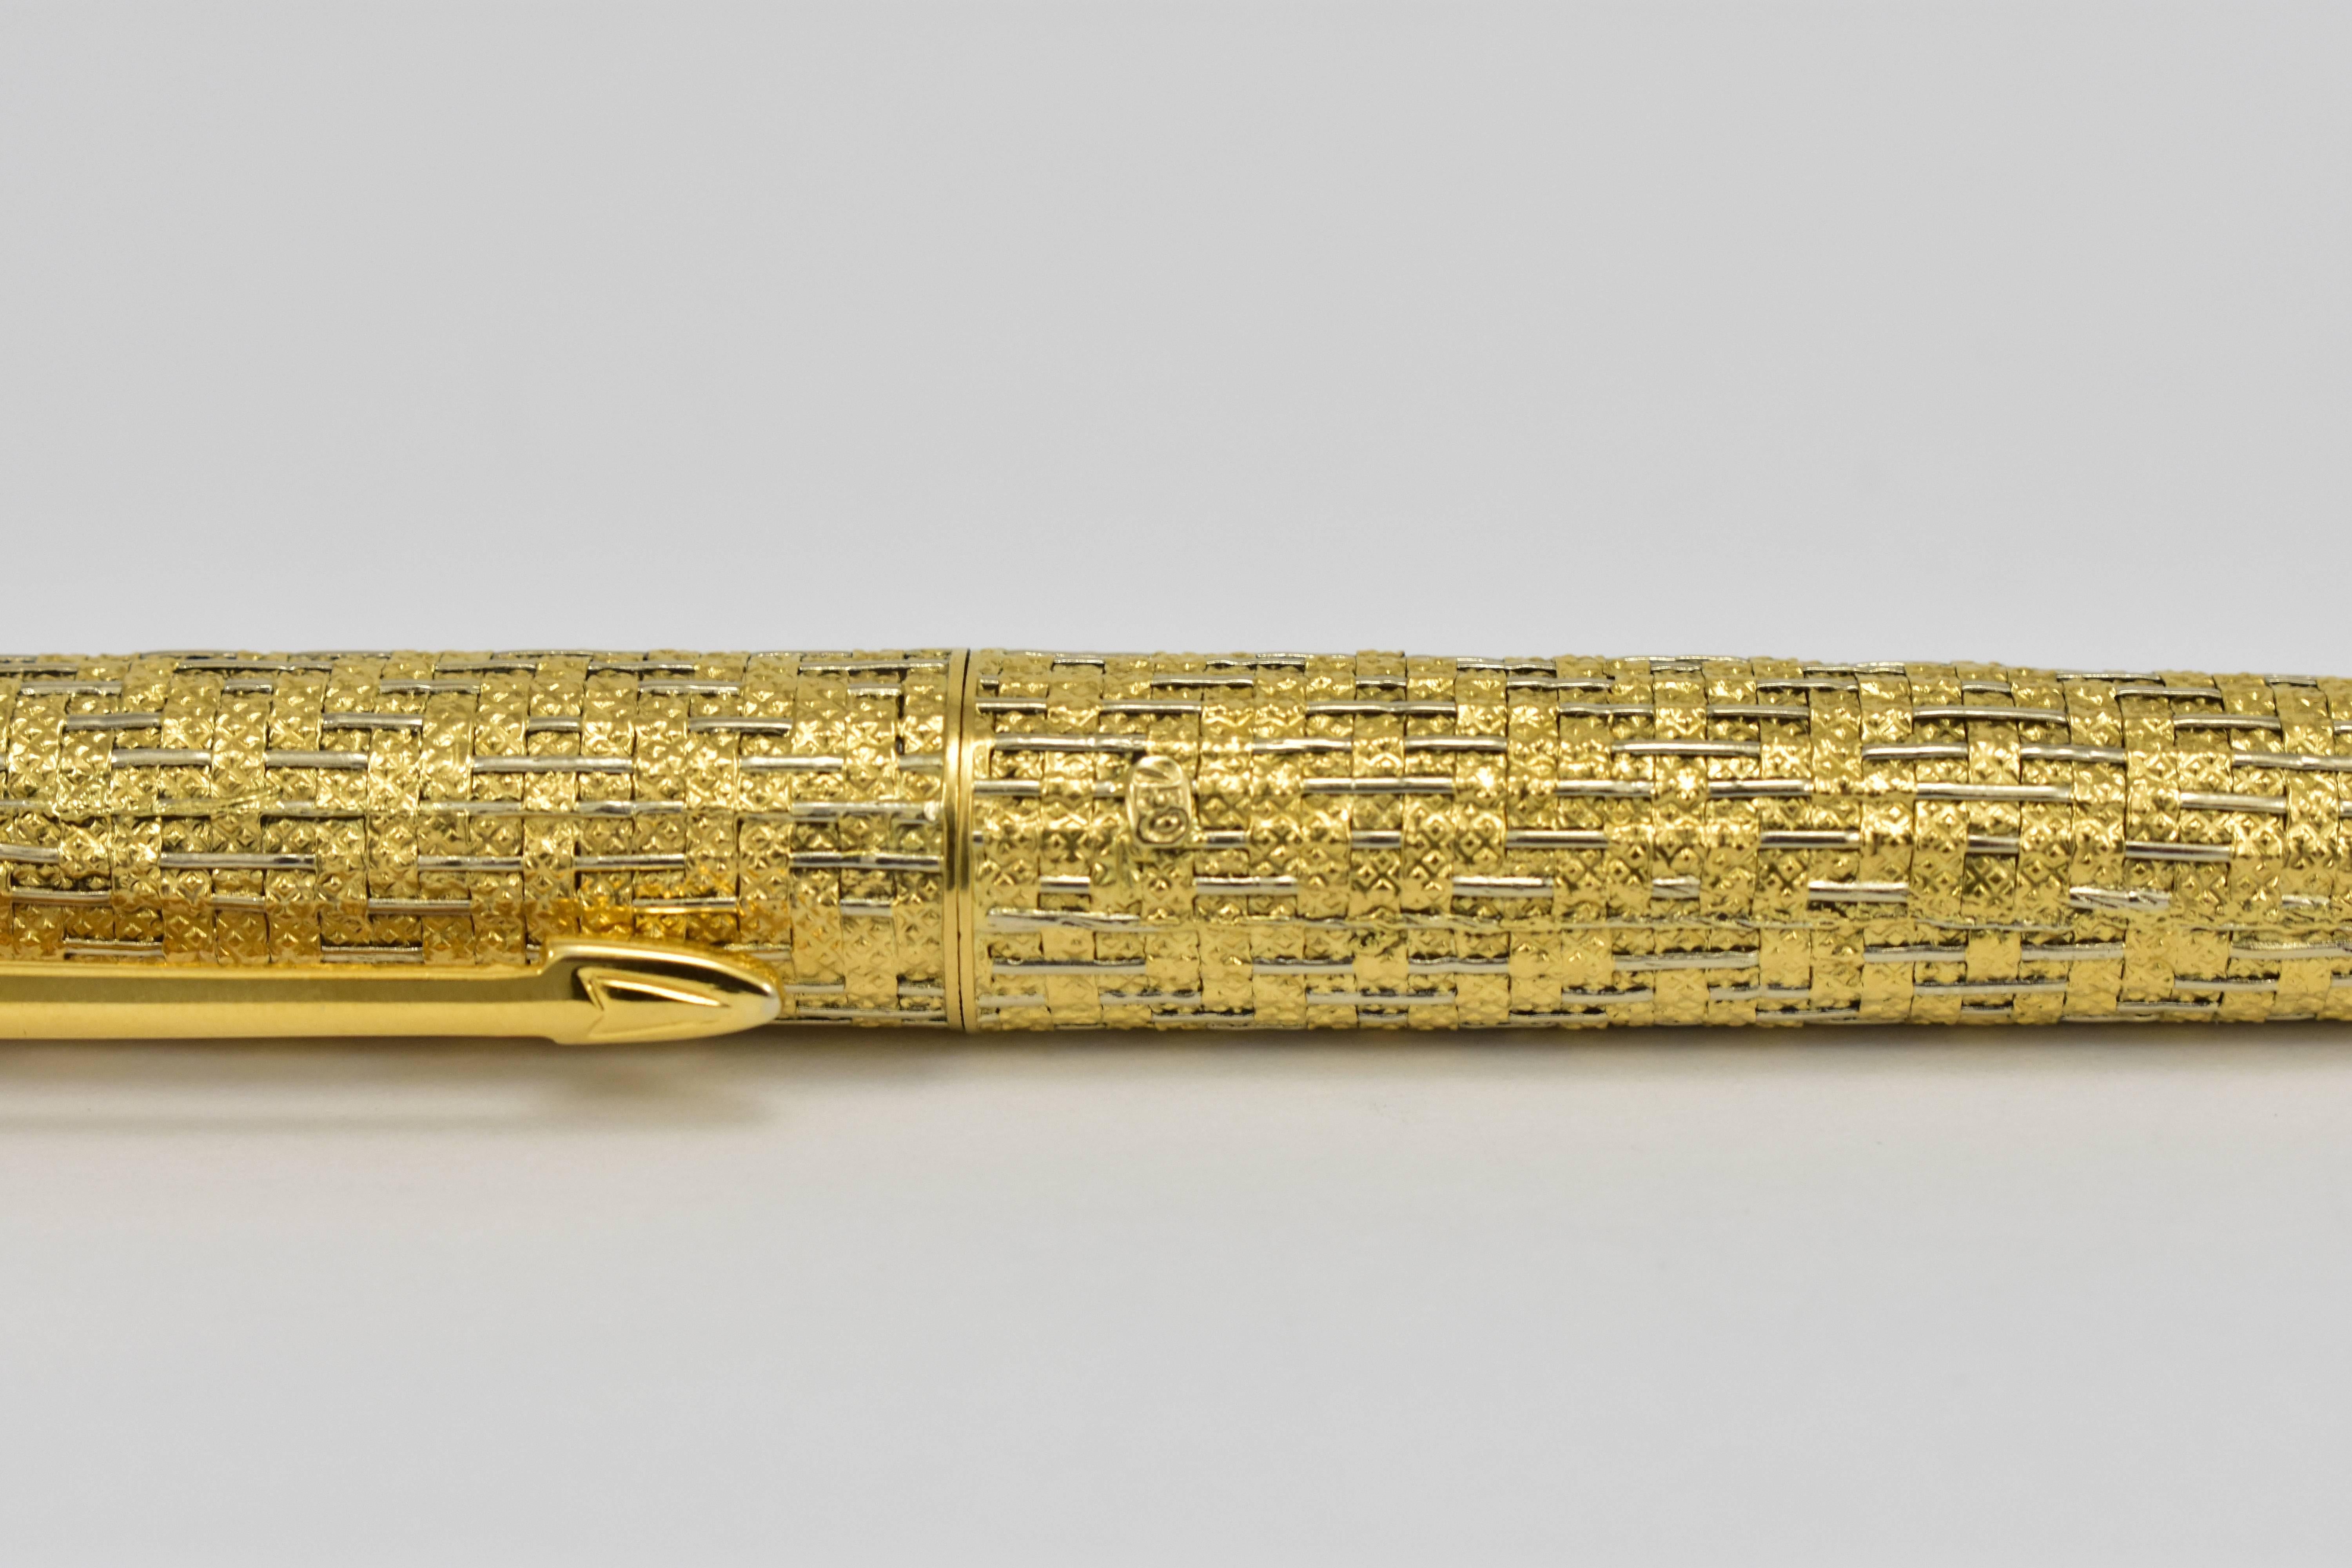 Parker Ballpoint Pen, White and Yellow Gold Basketweave For Sale 1